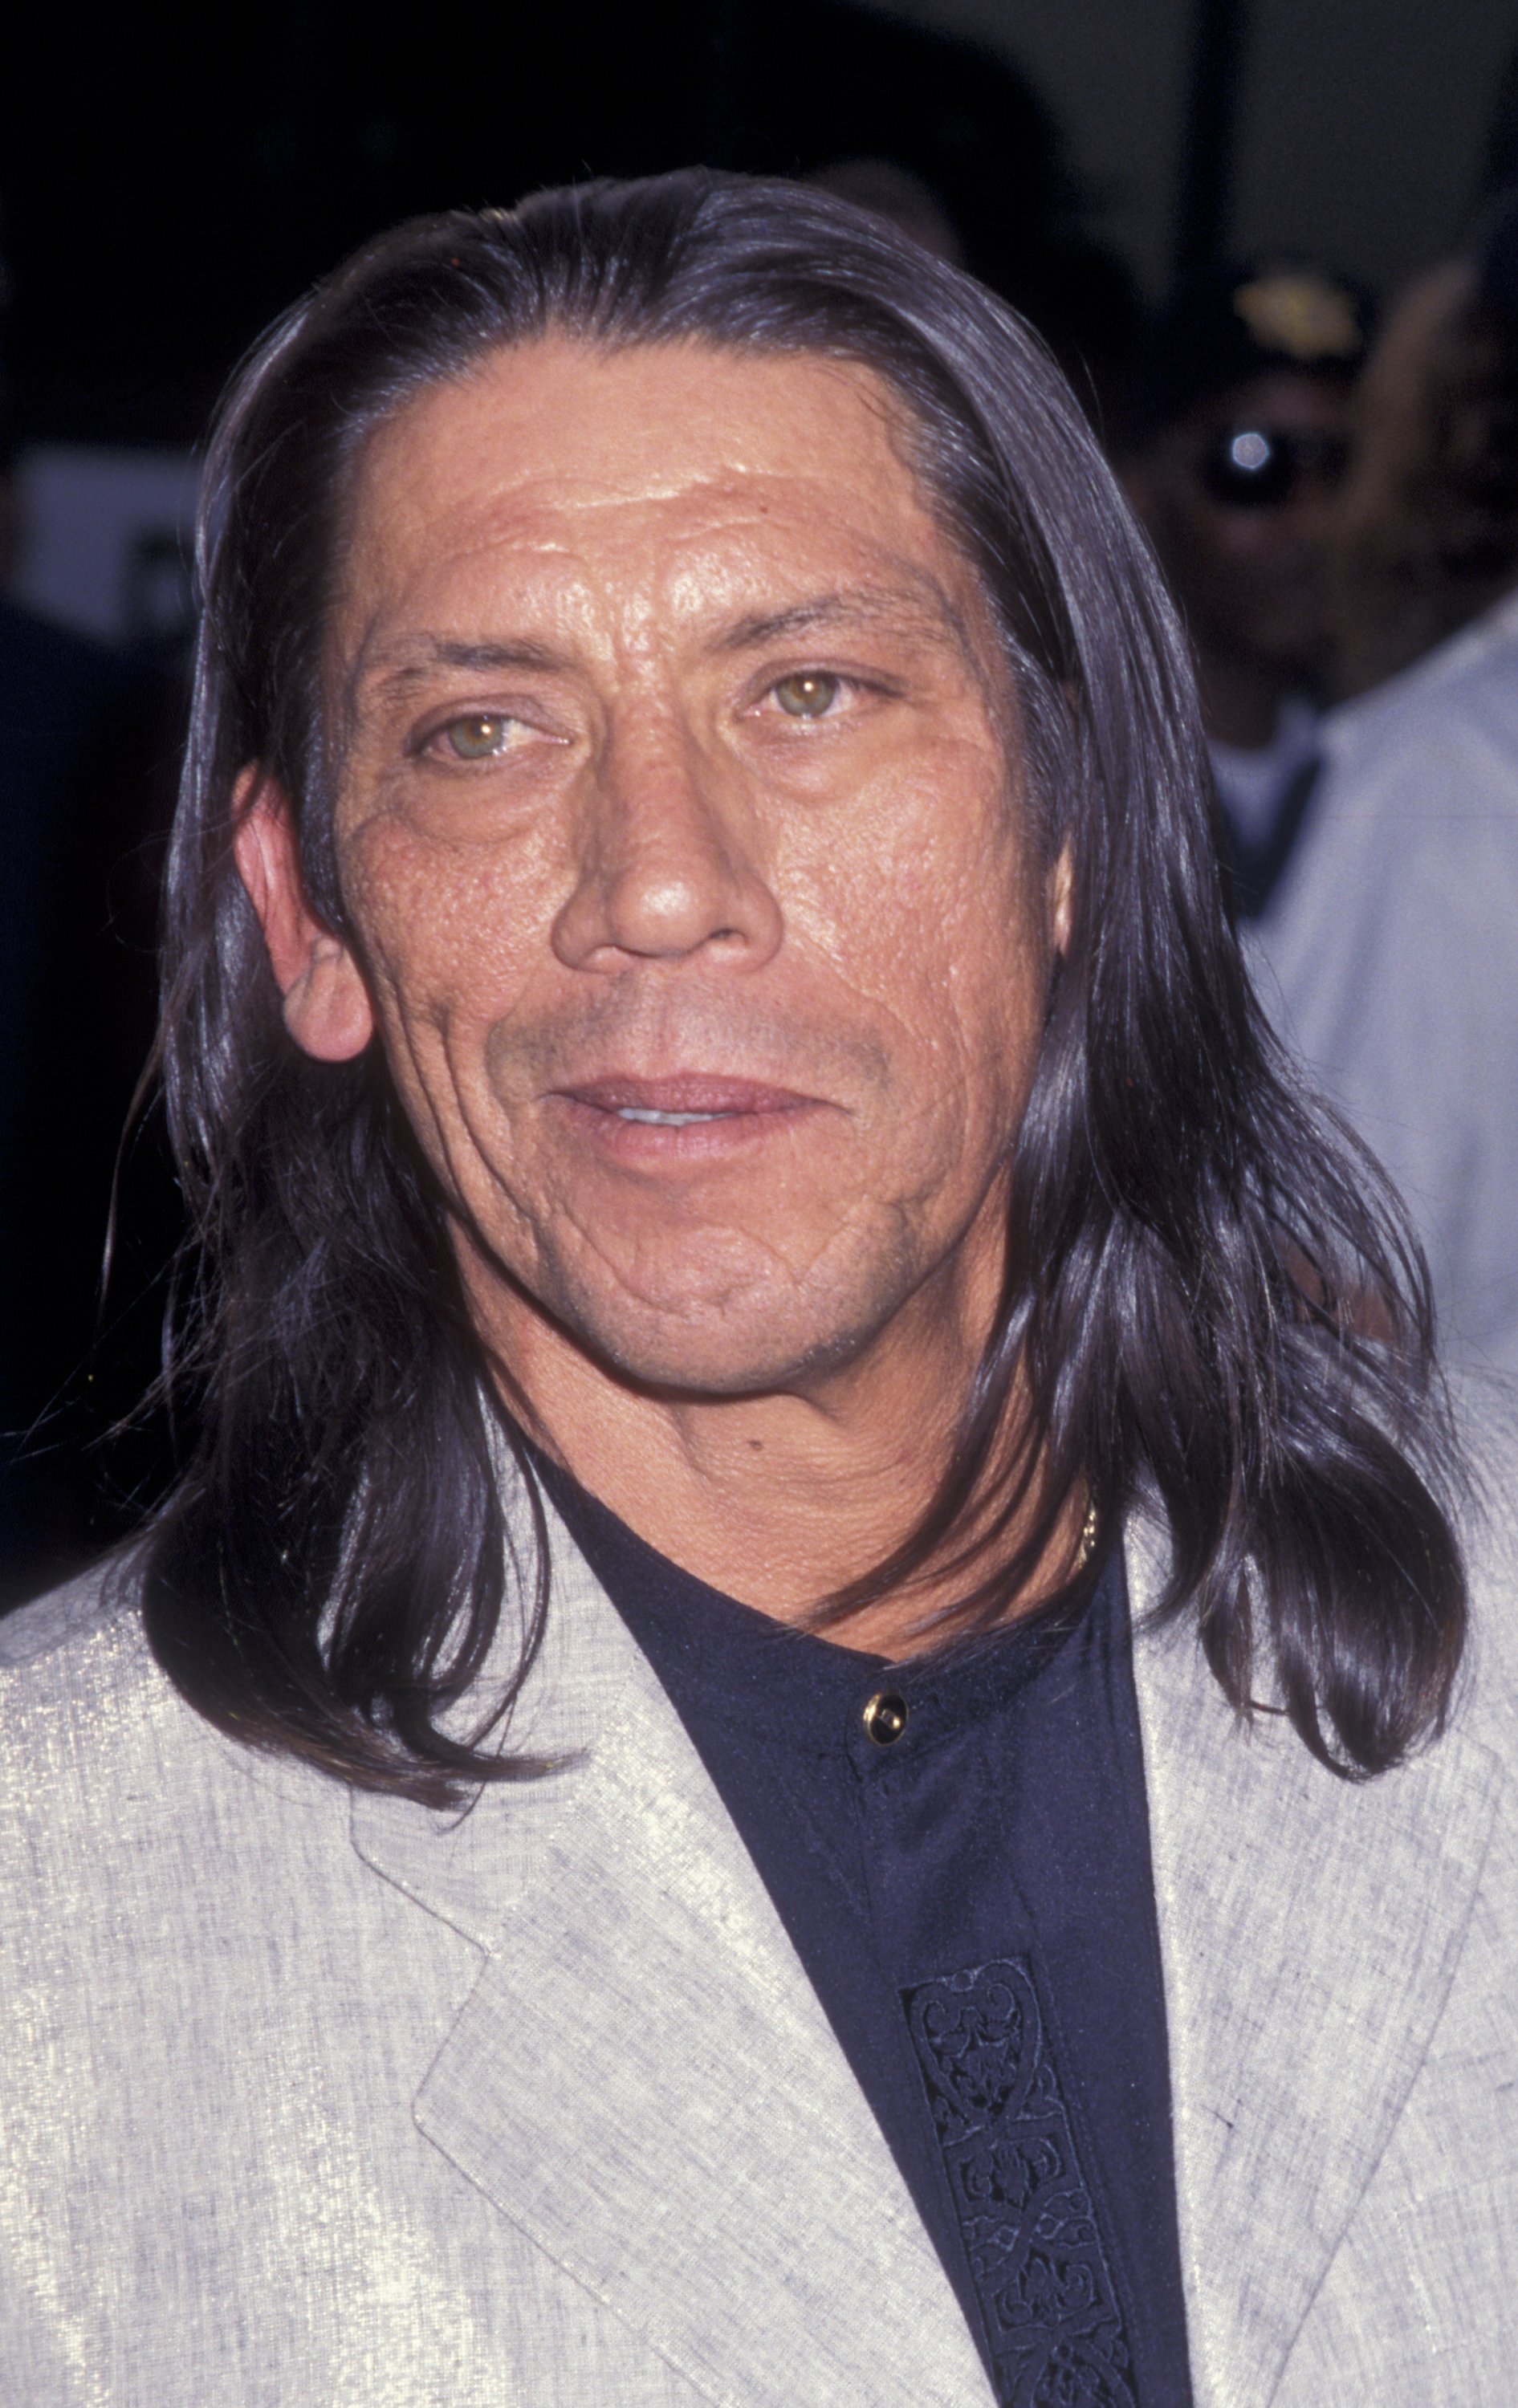  Danny Trejo attends the premiere party for "Con Air" on June 2, 1997 at the Hard Rock Hotel and Casino in Las Vegas, Nevada. | Source: Getty Images